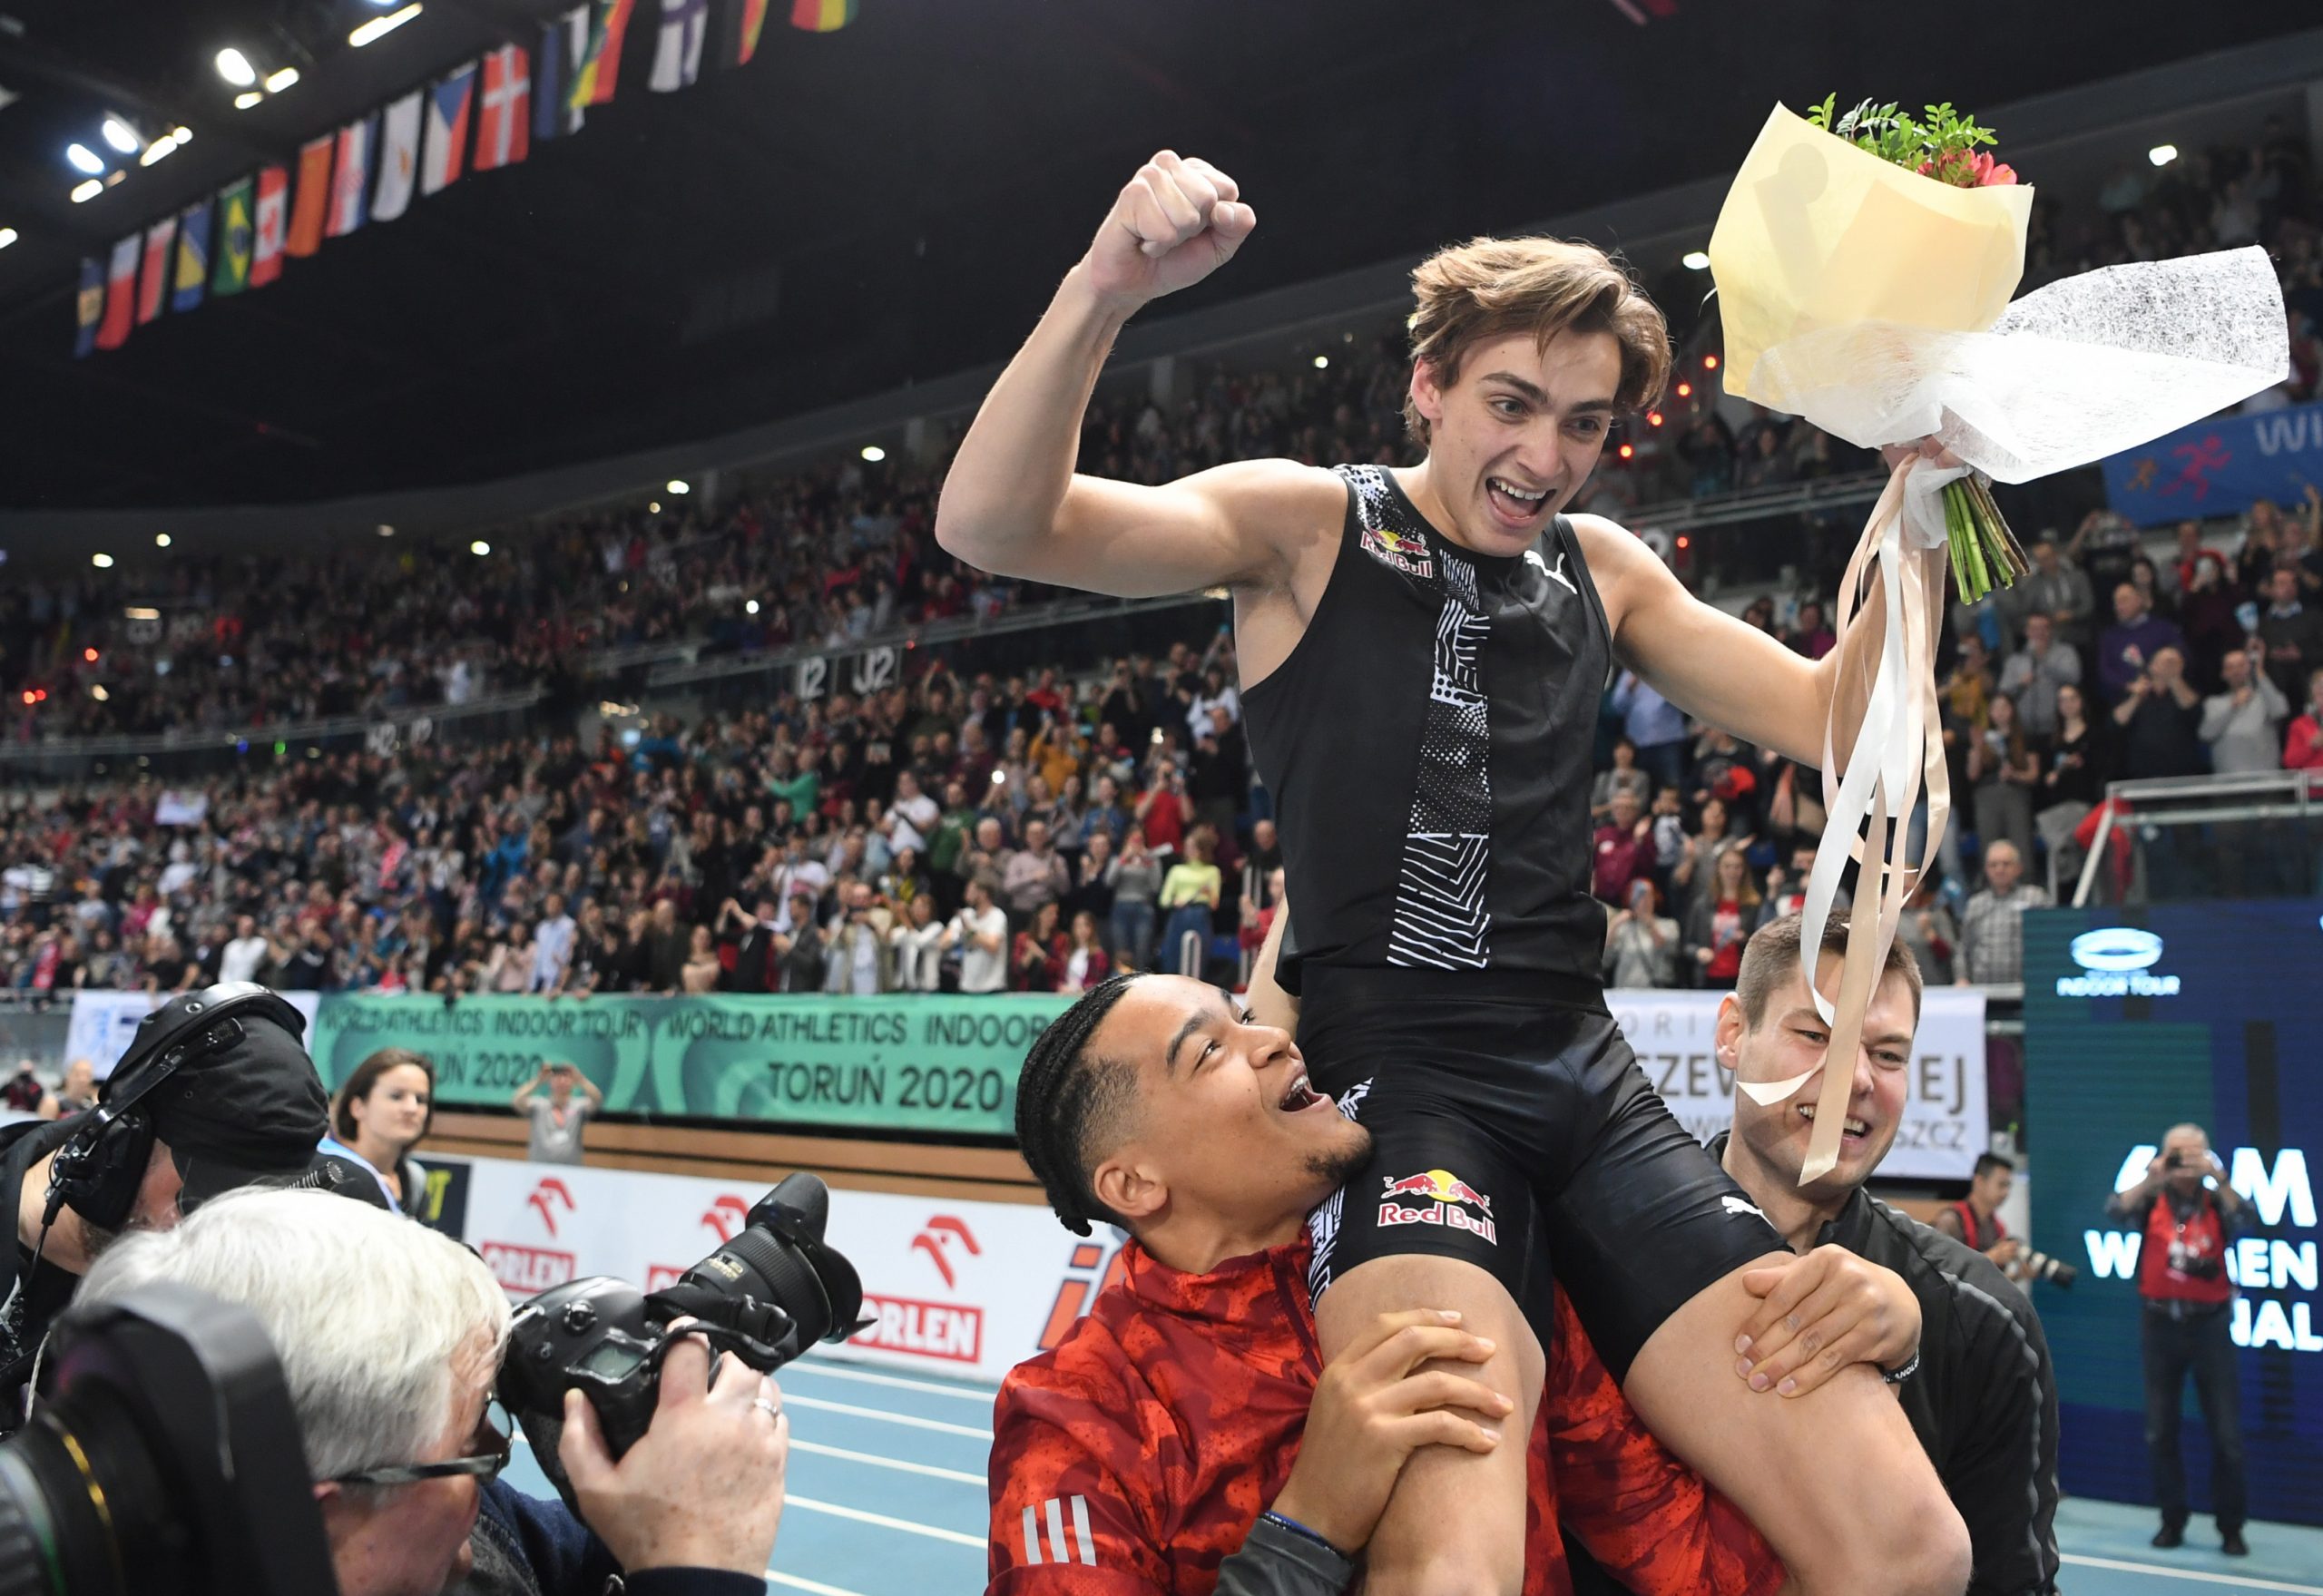 epa08203859 Armand Duplantis of Sweden celebrates after seting a new World Record (6.17) in the men's Pole Vault final during the indoor athletics meeting Orlen Copernicus Cup 2020 in Torun. Poland, 08 February 2020.  EPA/TYTUS ZMIJEWSKI POLAND OUT